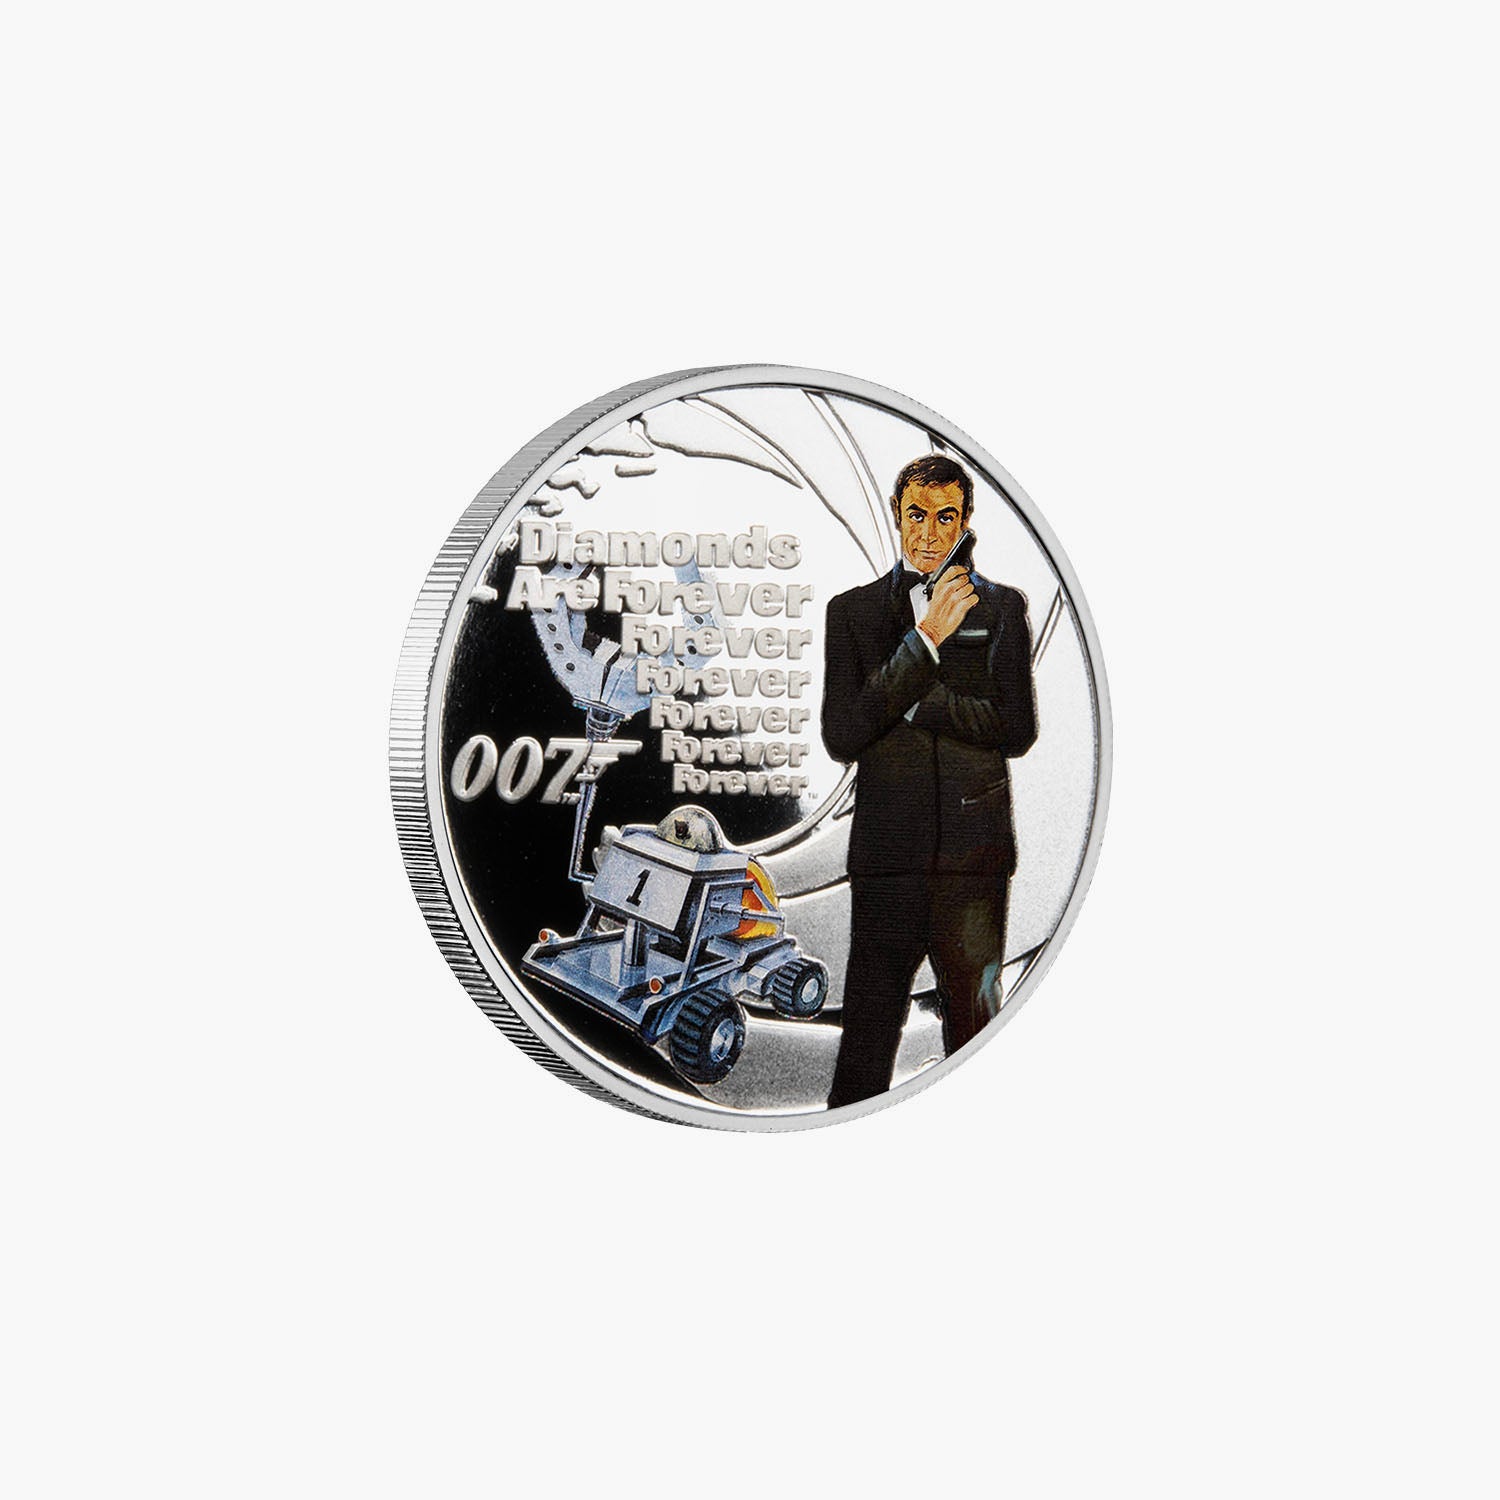 James Bond - Diamonds are Forever Solid Silver Movie Coin